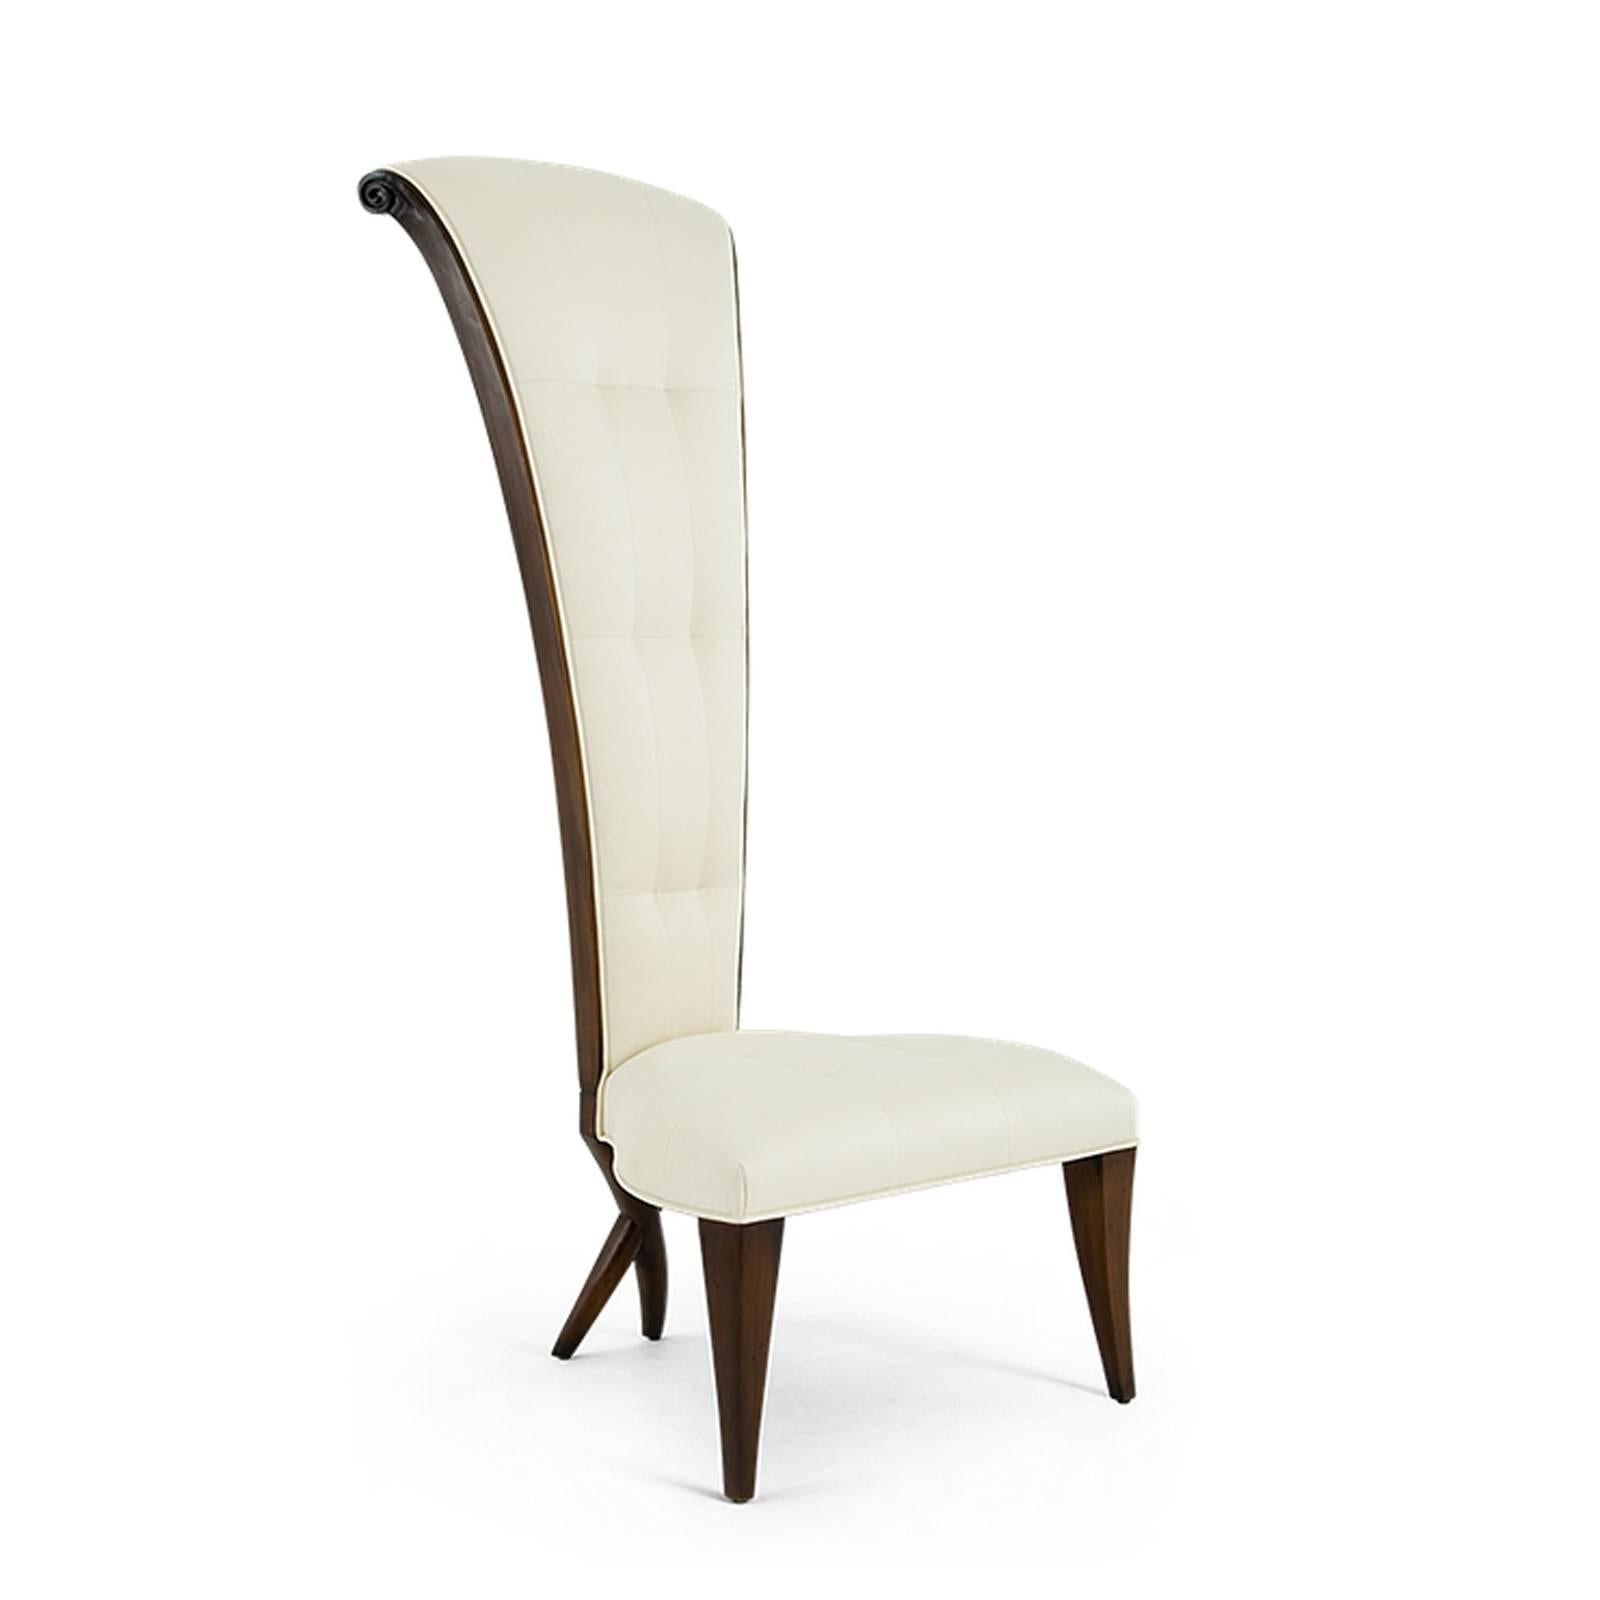 Contemporary Smart High Back Chair in Solid Mahogany Wood and High Quality Fabric